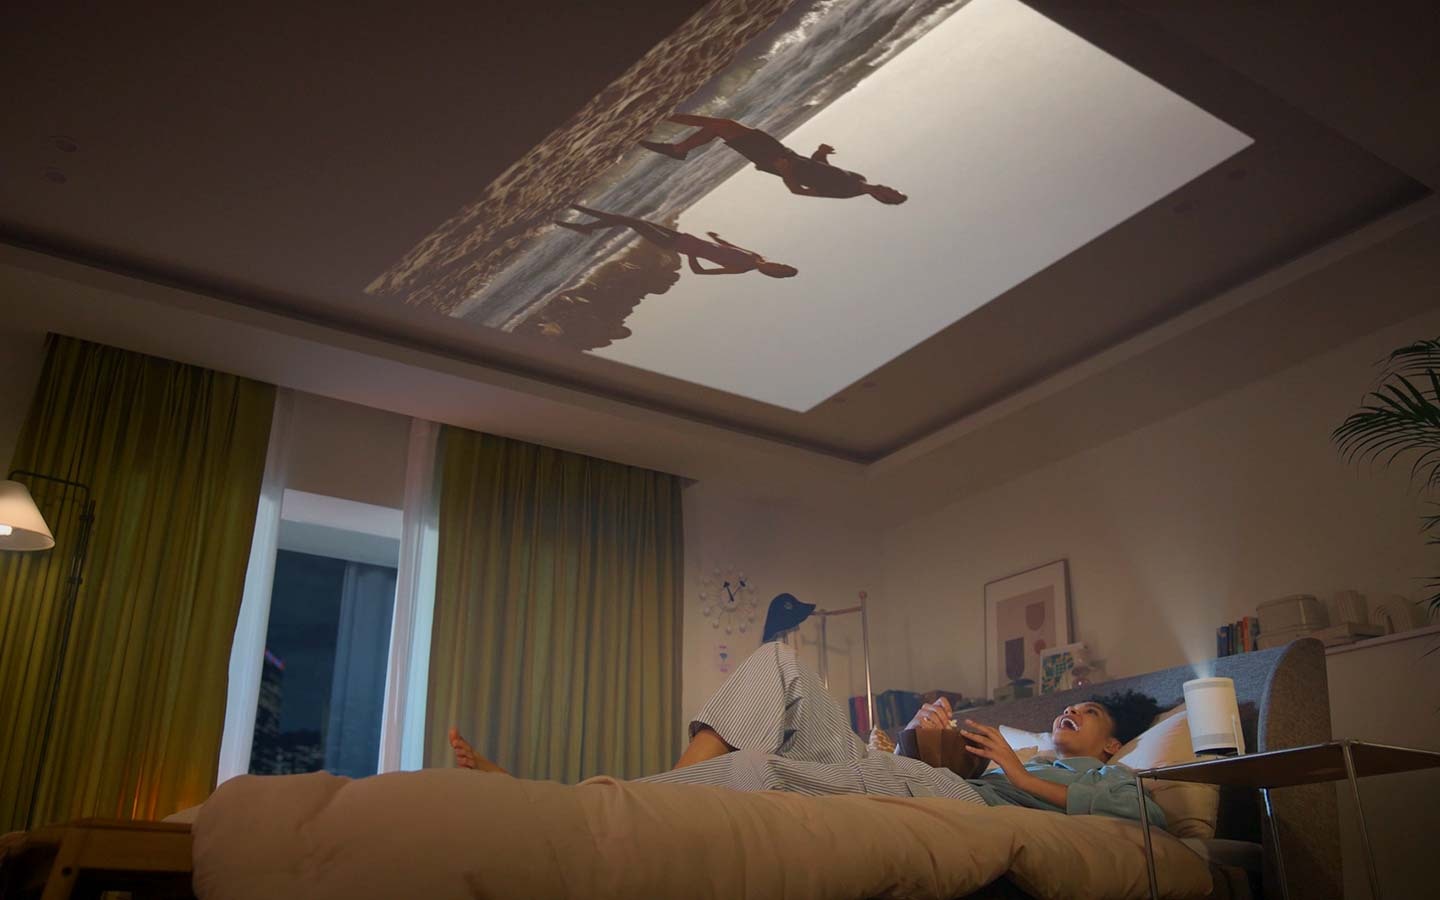 A woman is sitting on her bed eating popcorn, watching a video The Freestyle is projecting onto the wall in front of bed. Then she tilts The Freestyle so it points upwards and lays back with her head on the pillow, continuing to enjoying the video that’s now projected onto the ceiling.